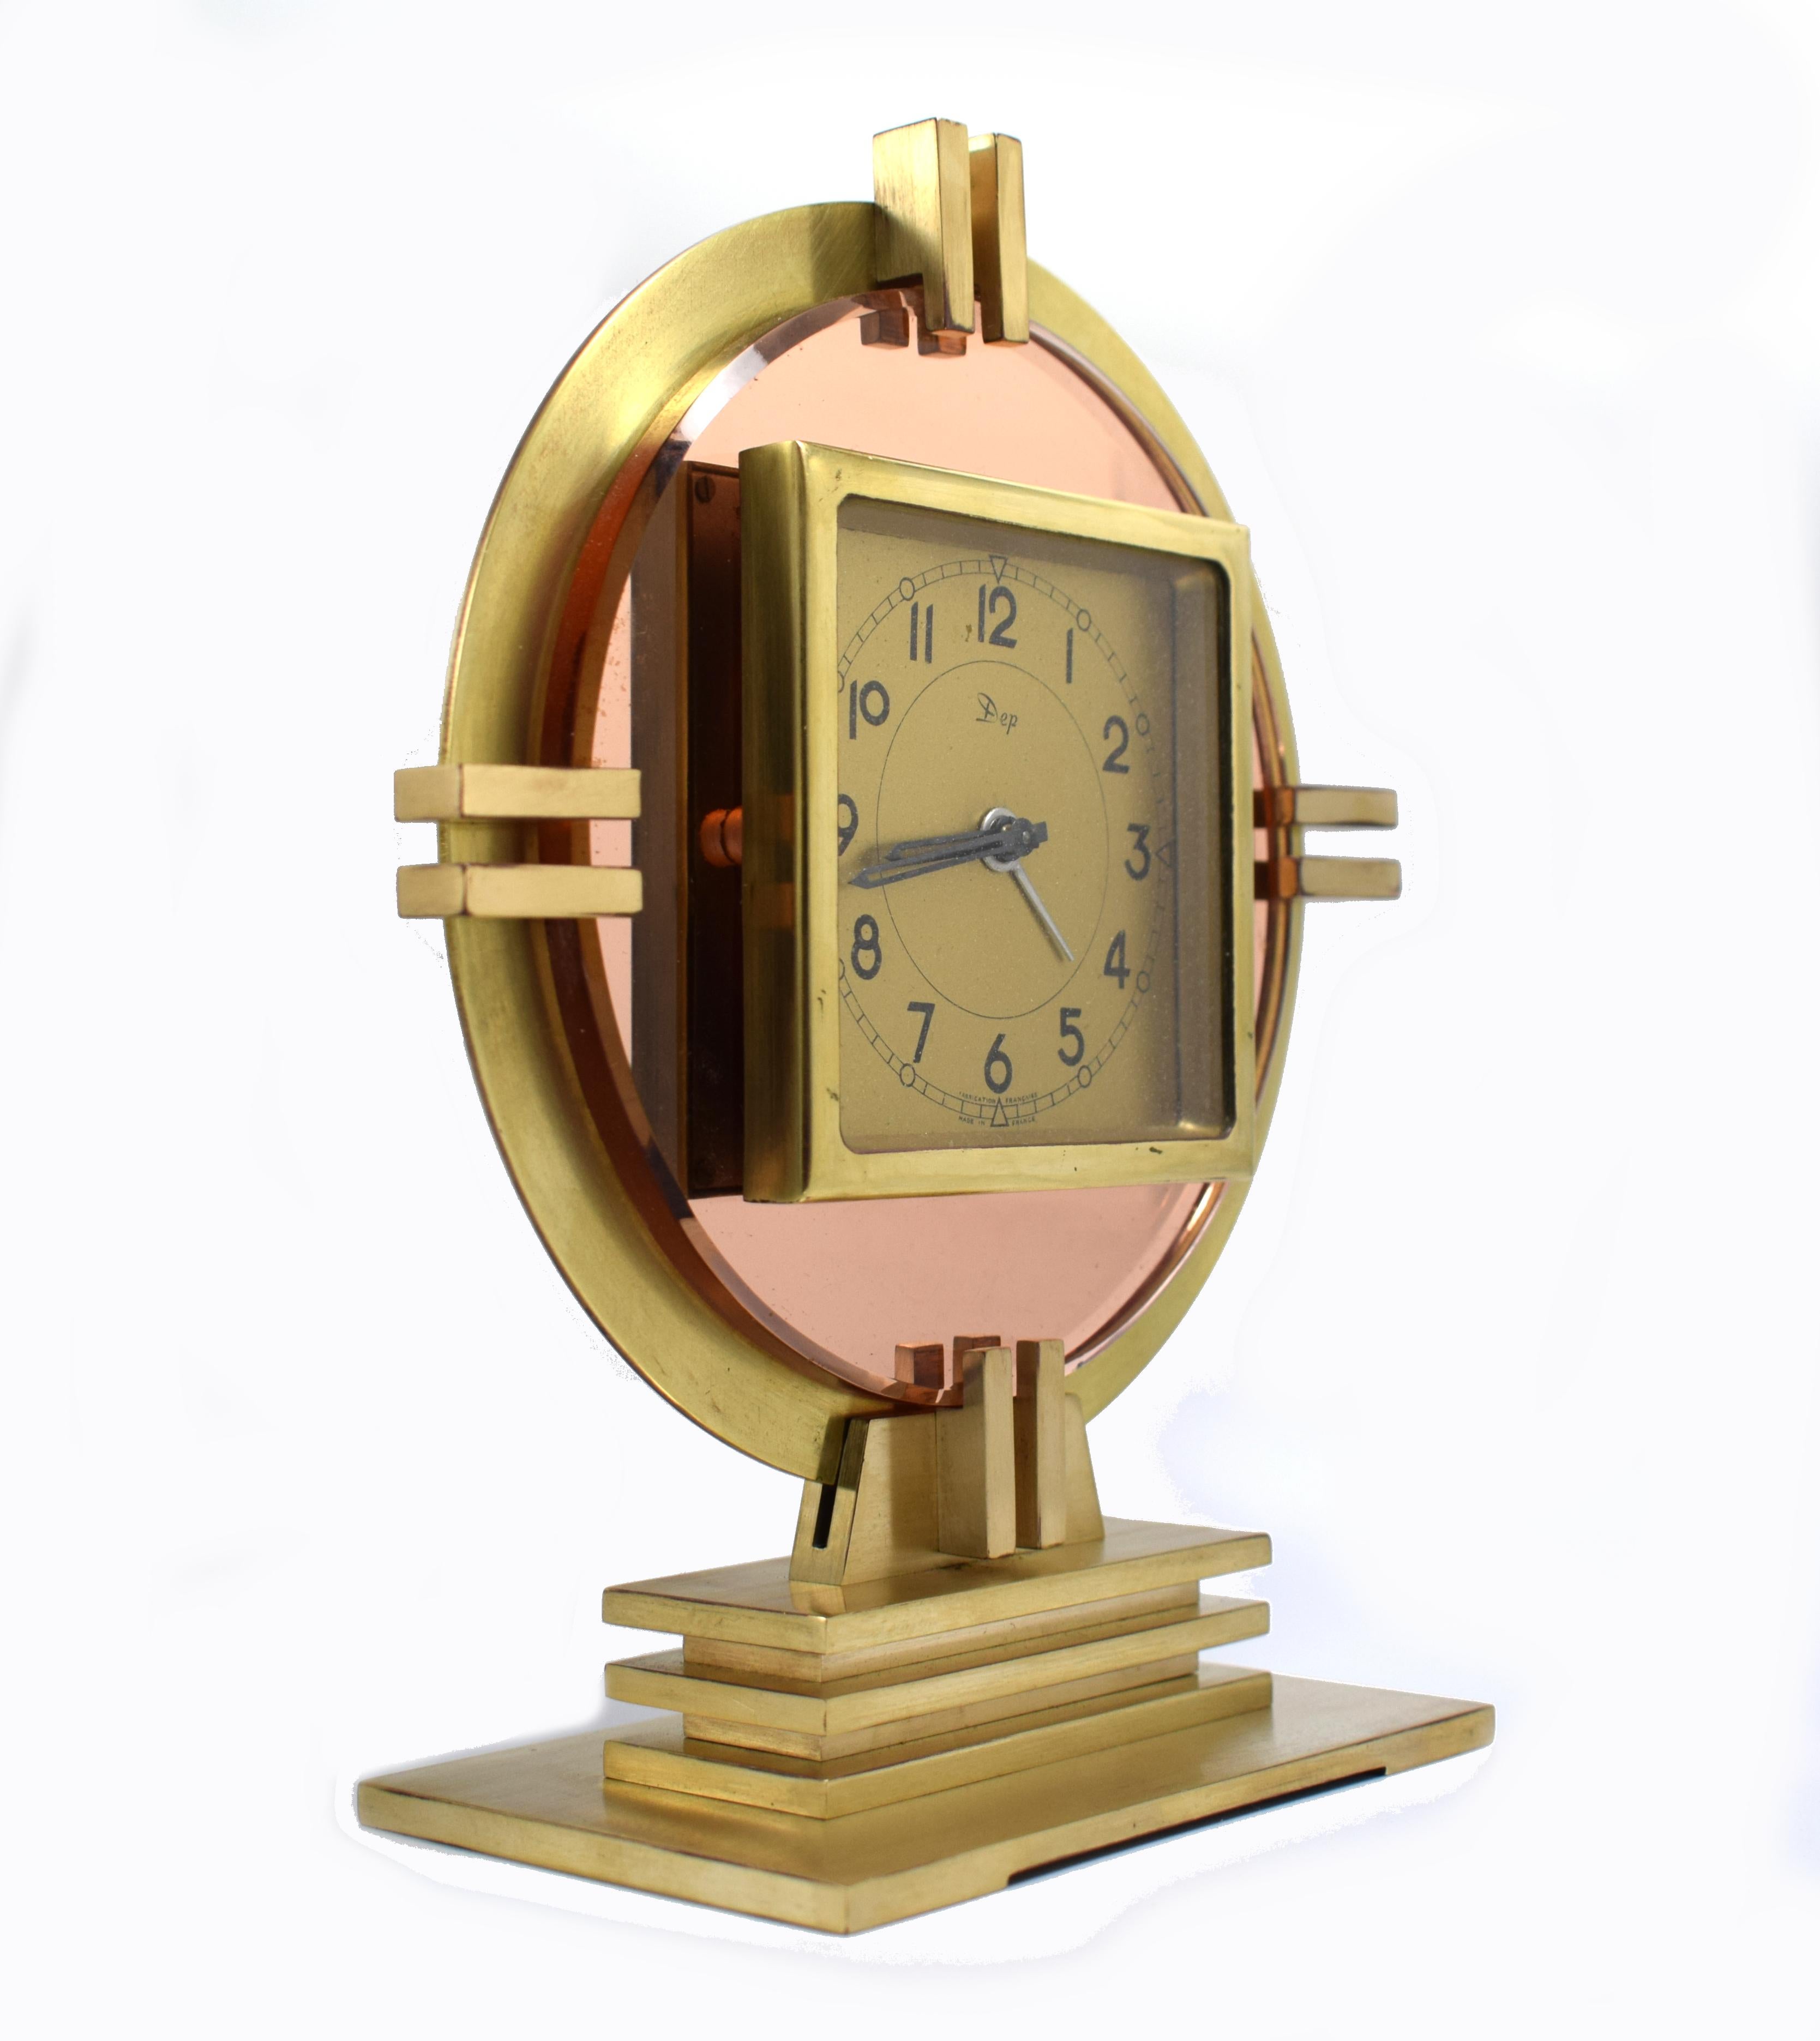 These types of clocks don't come along very often and so are delighted to be able to show you this superb 1930s Art Deco modernist machine age clock made by Dep and originating from France. The eight day wind up movement has been fully and